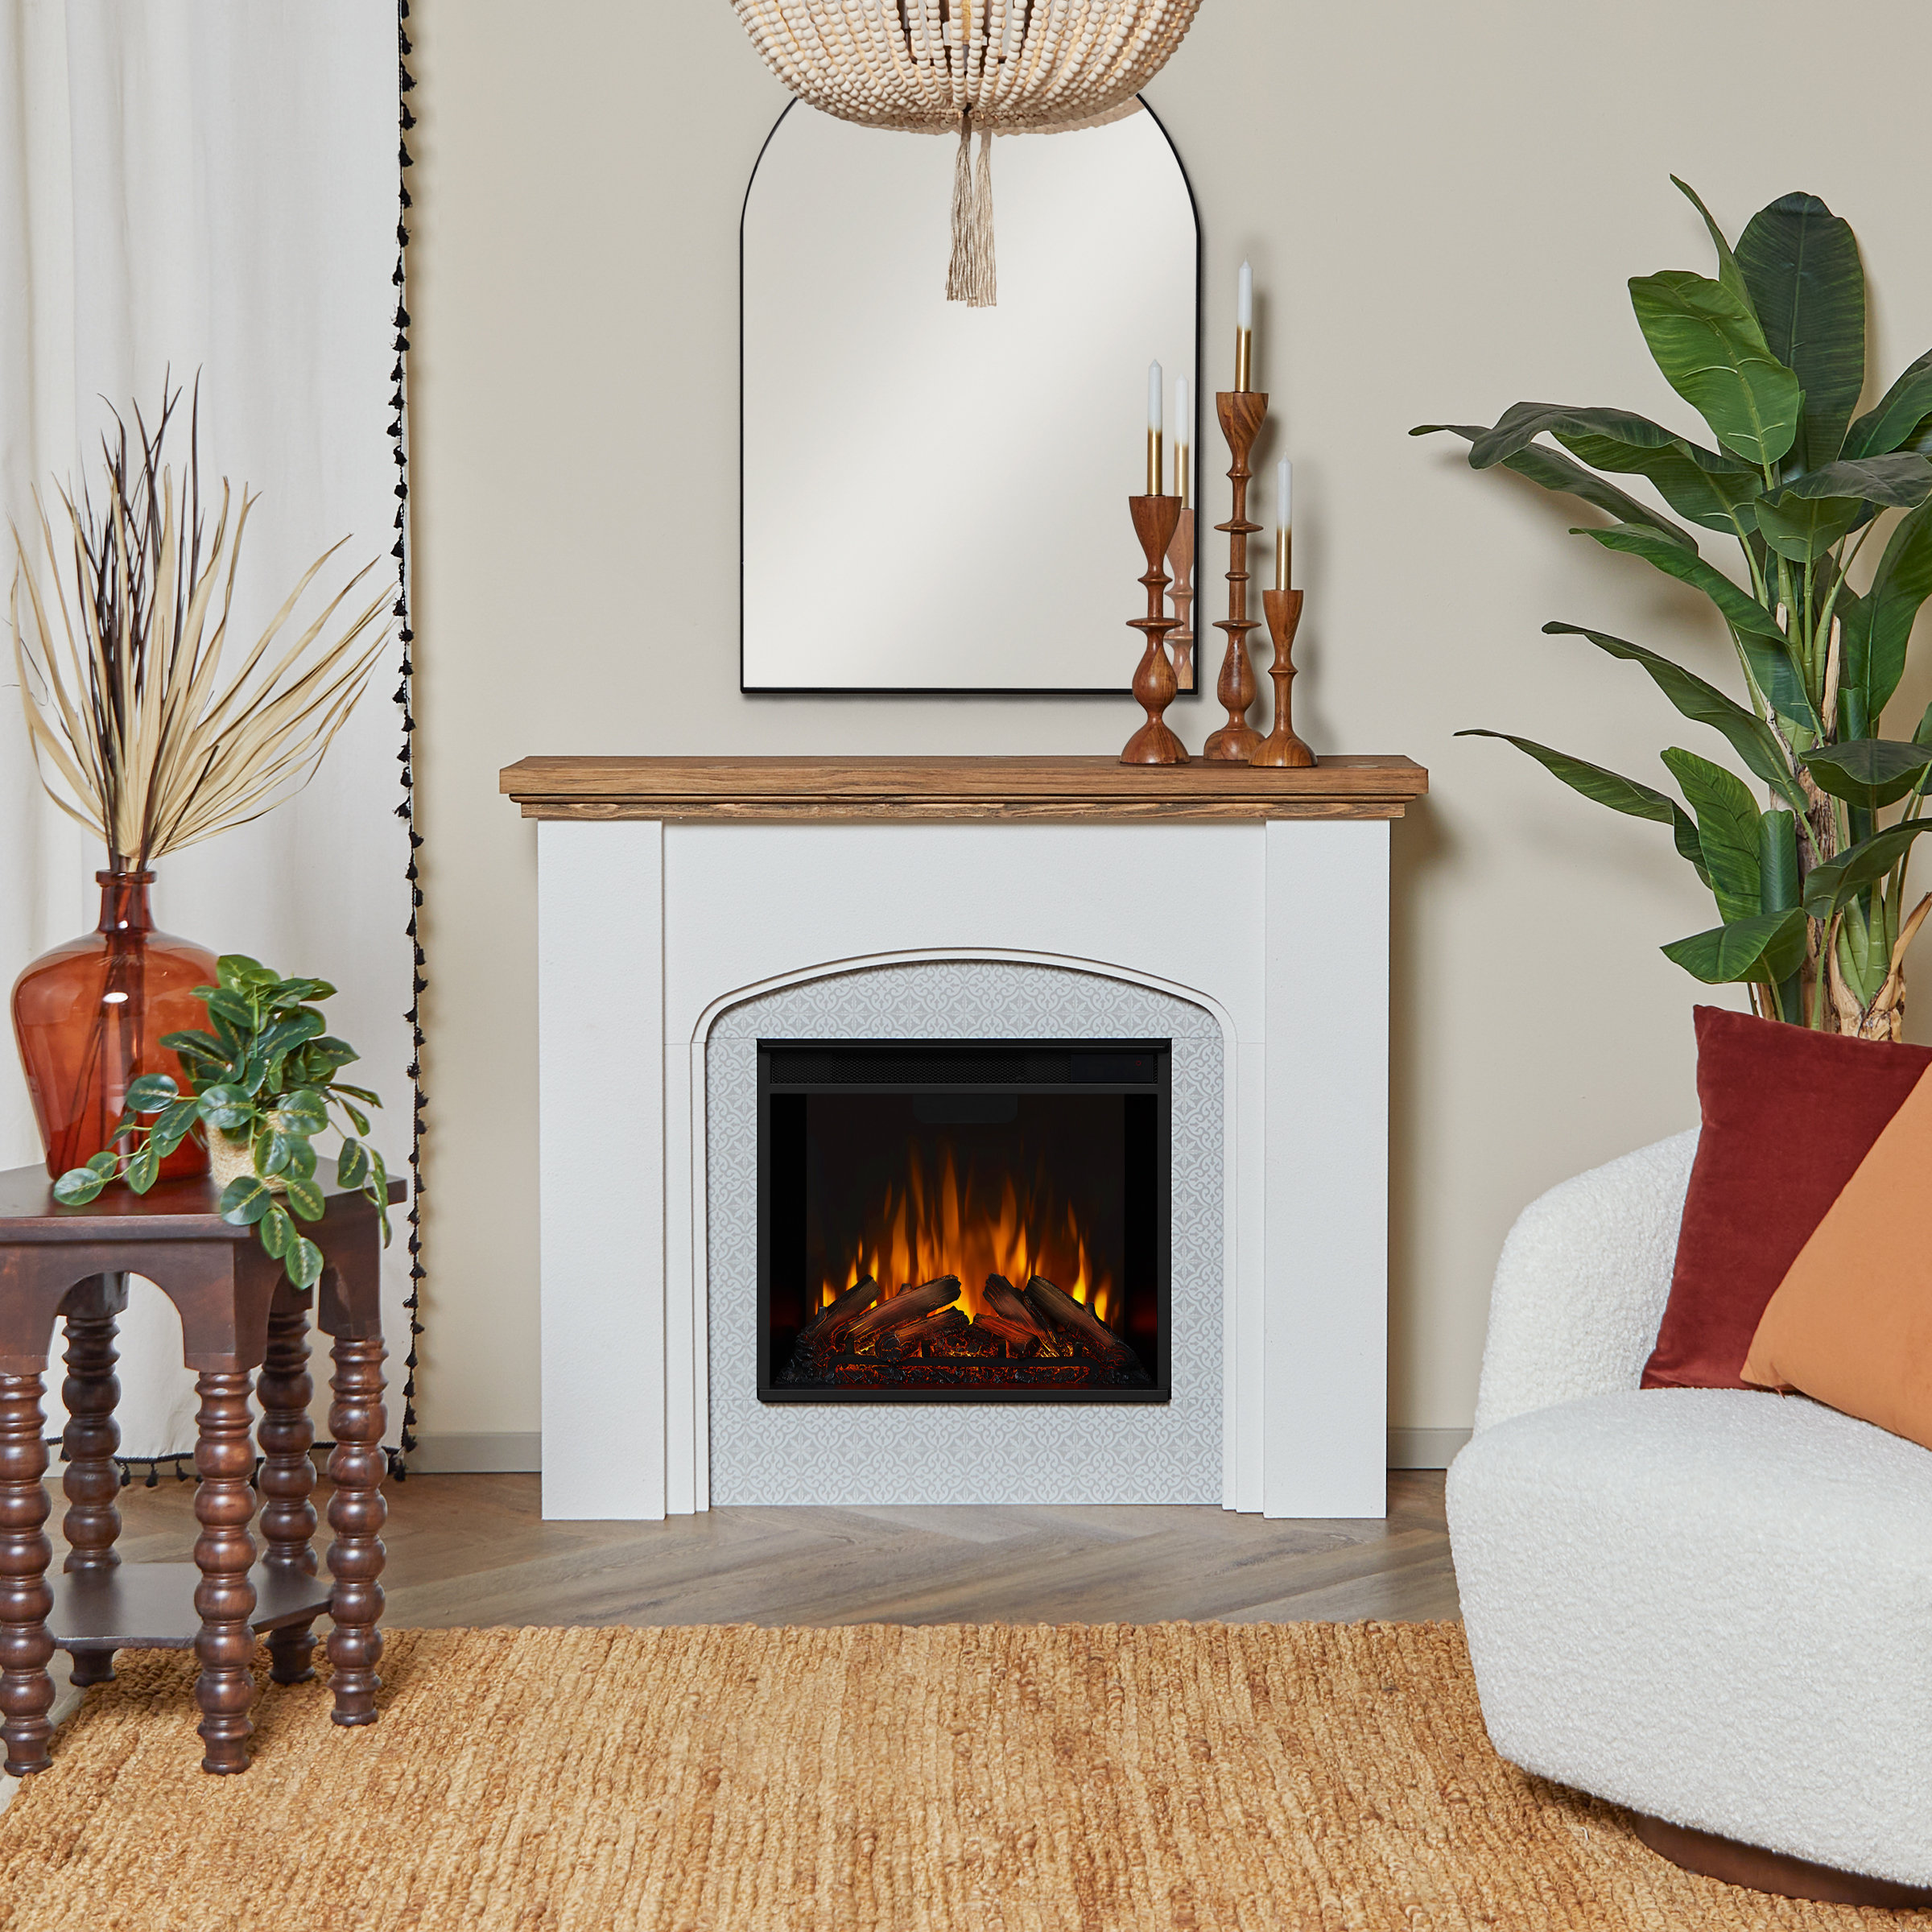 Fireplace Insert Surround and Wall Heat Shield Solutions